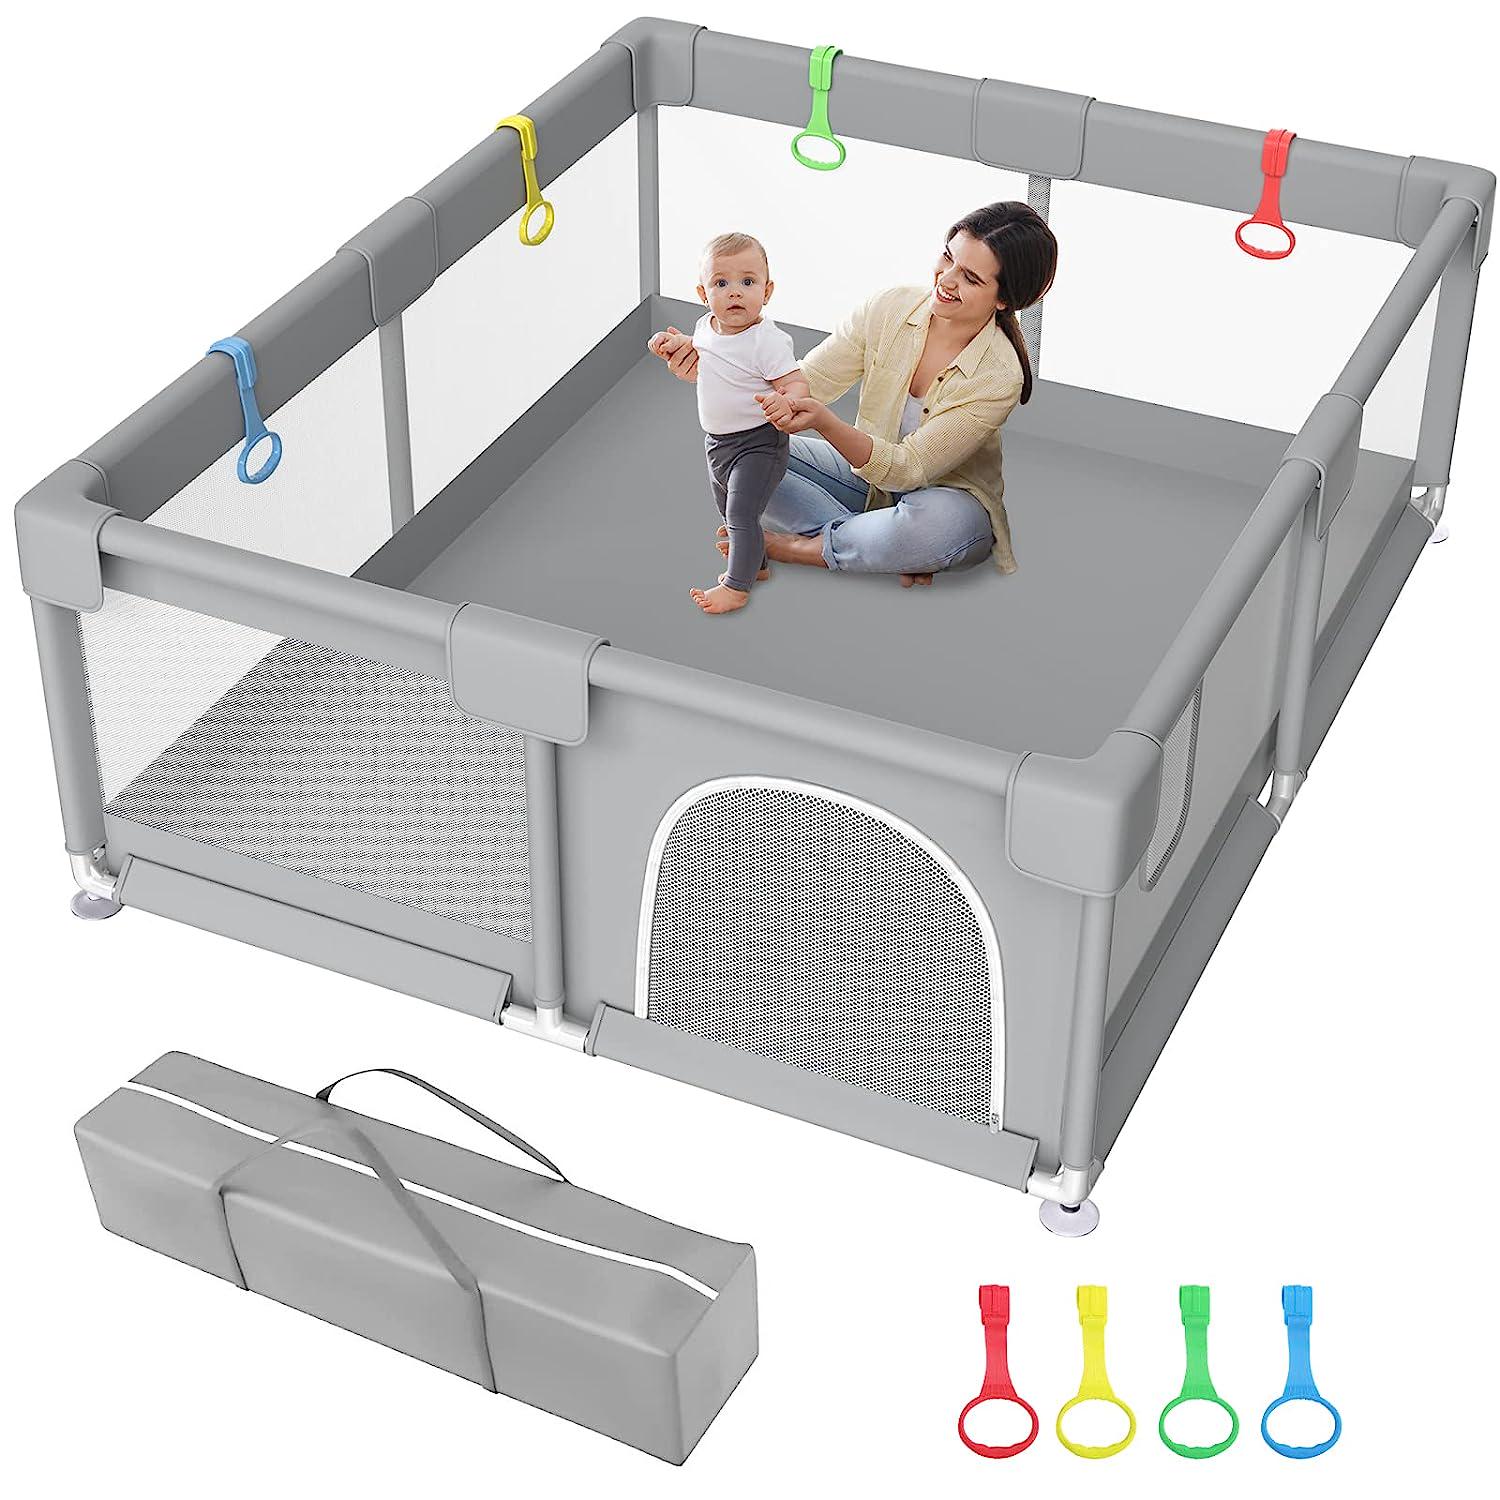 Baby Playpen, 71 x59 Extra Large Playpen for Babies and Toddlers Baby Playards with Zipper Gate, Safety Baby Play Pen with Soft Breathable Mesh Indoor and Outdoor Kids Activity Center-